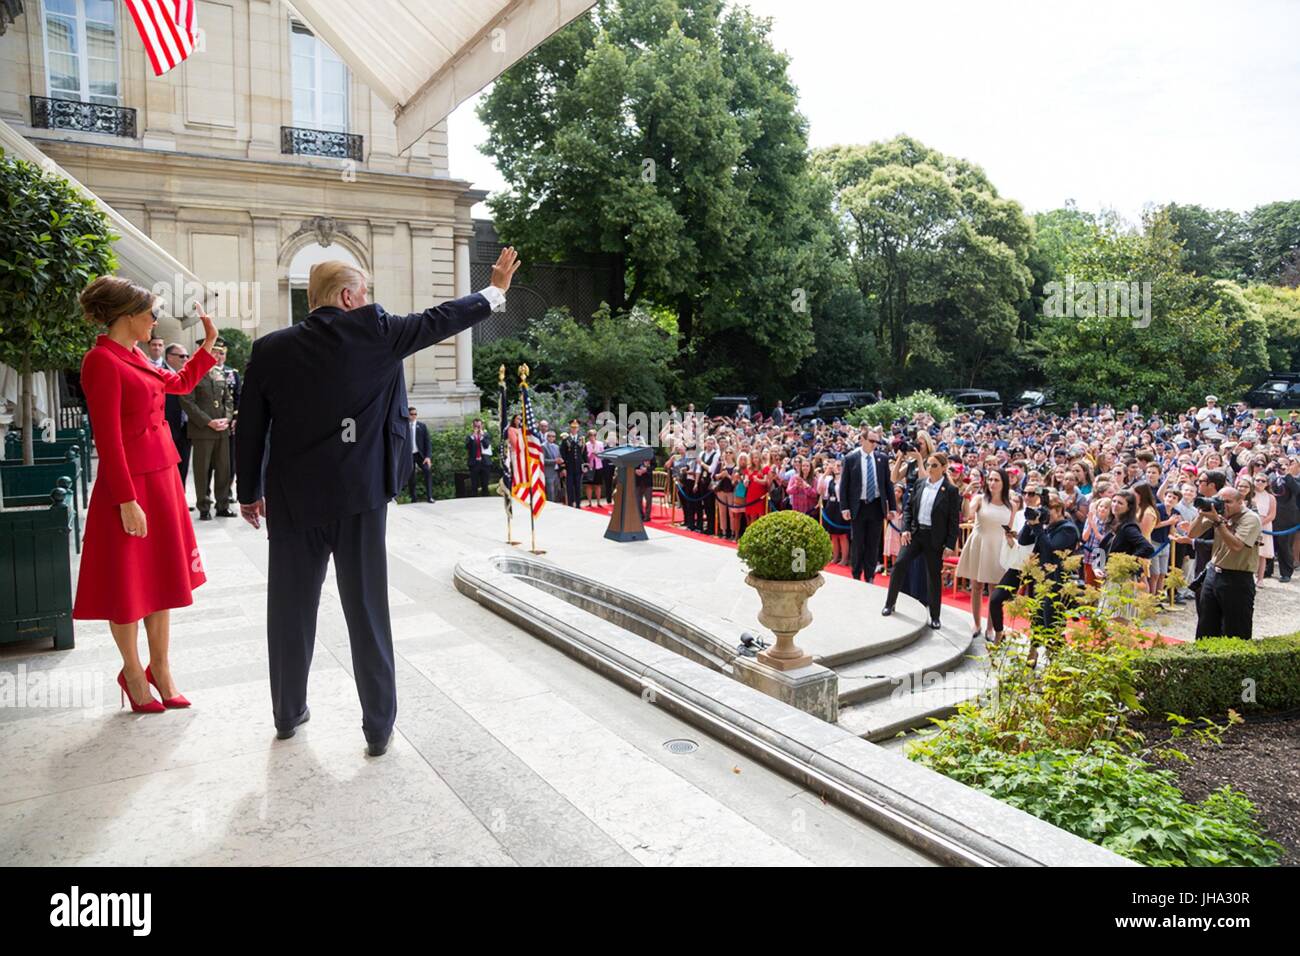 Paris, France. 13th July, 2017. U.S. President Donald Trump and First Lady Melania Trump wave as they arrive for an event honoring veterans at the U.S. Embassy July 13, 2017 in Paris, France. The first family is in Paris to commemorate the 100th anniversary of the United States' entry into World War I and attend Bastille Day celebrations. Credit: Planetpix/Alamy Live News Stock Photo